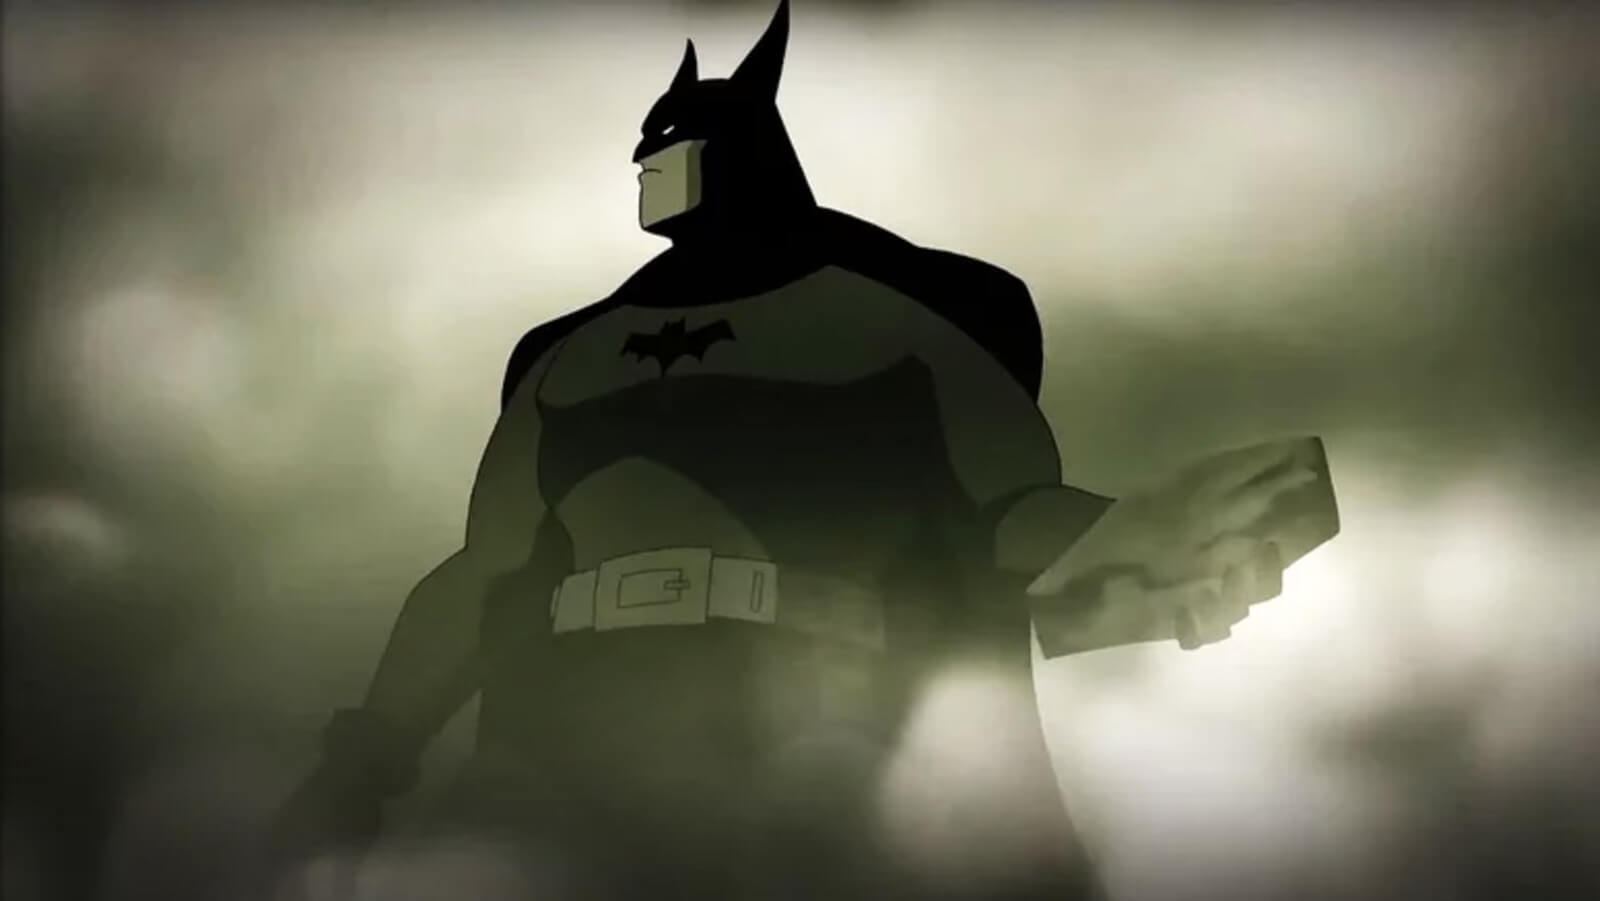 Batman Caped Crusader has been canceled on HBO Max 